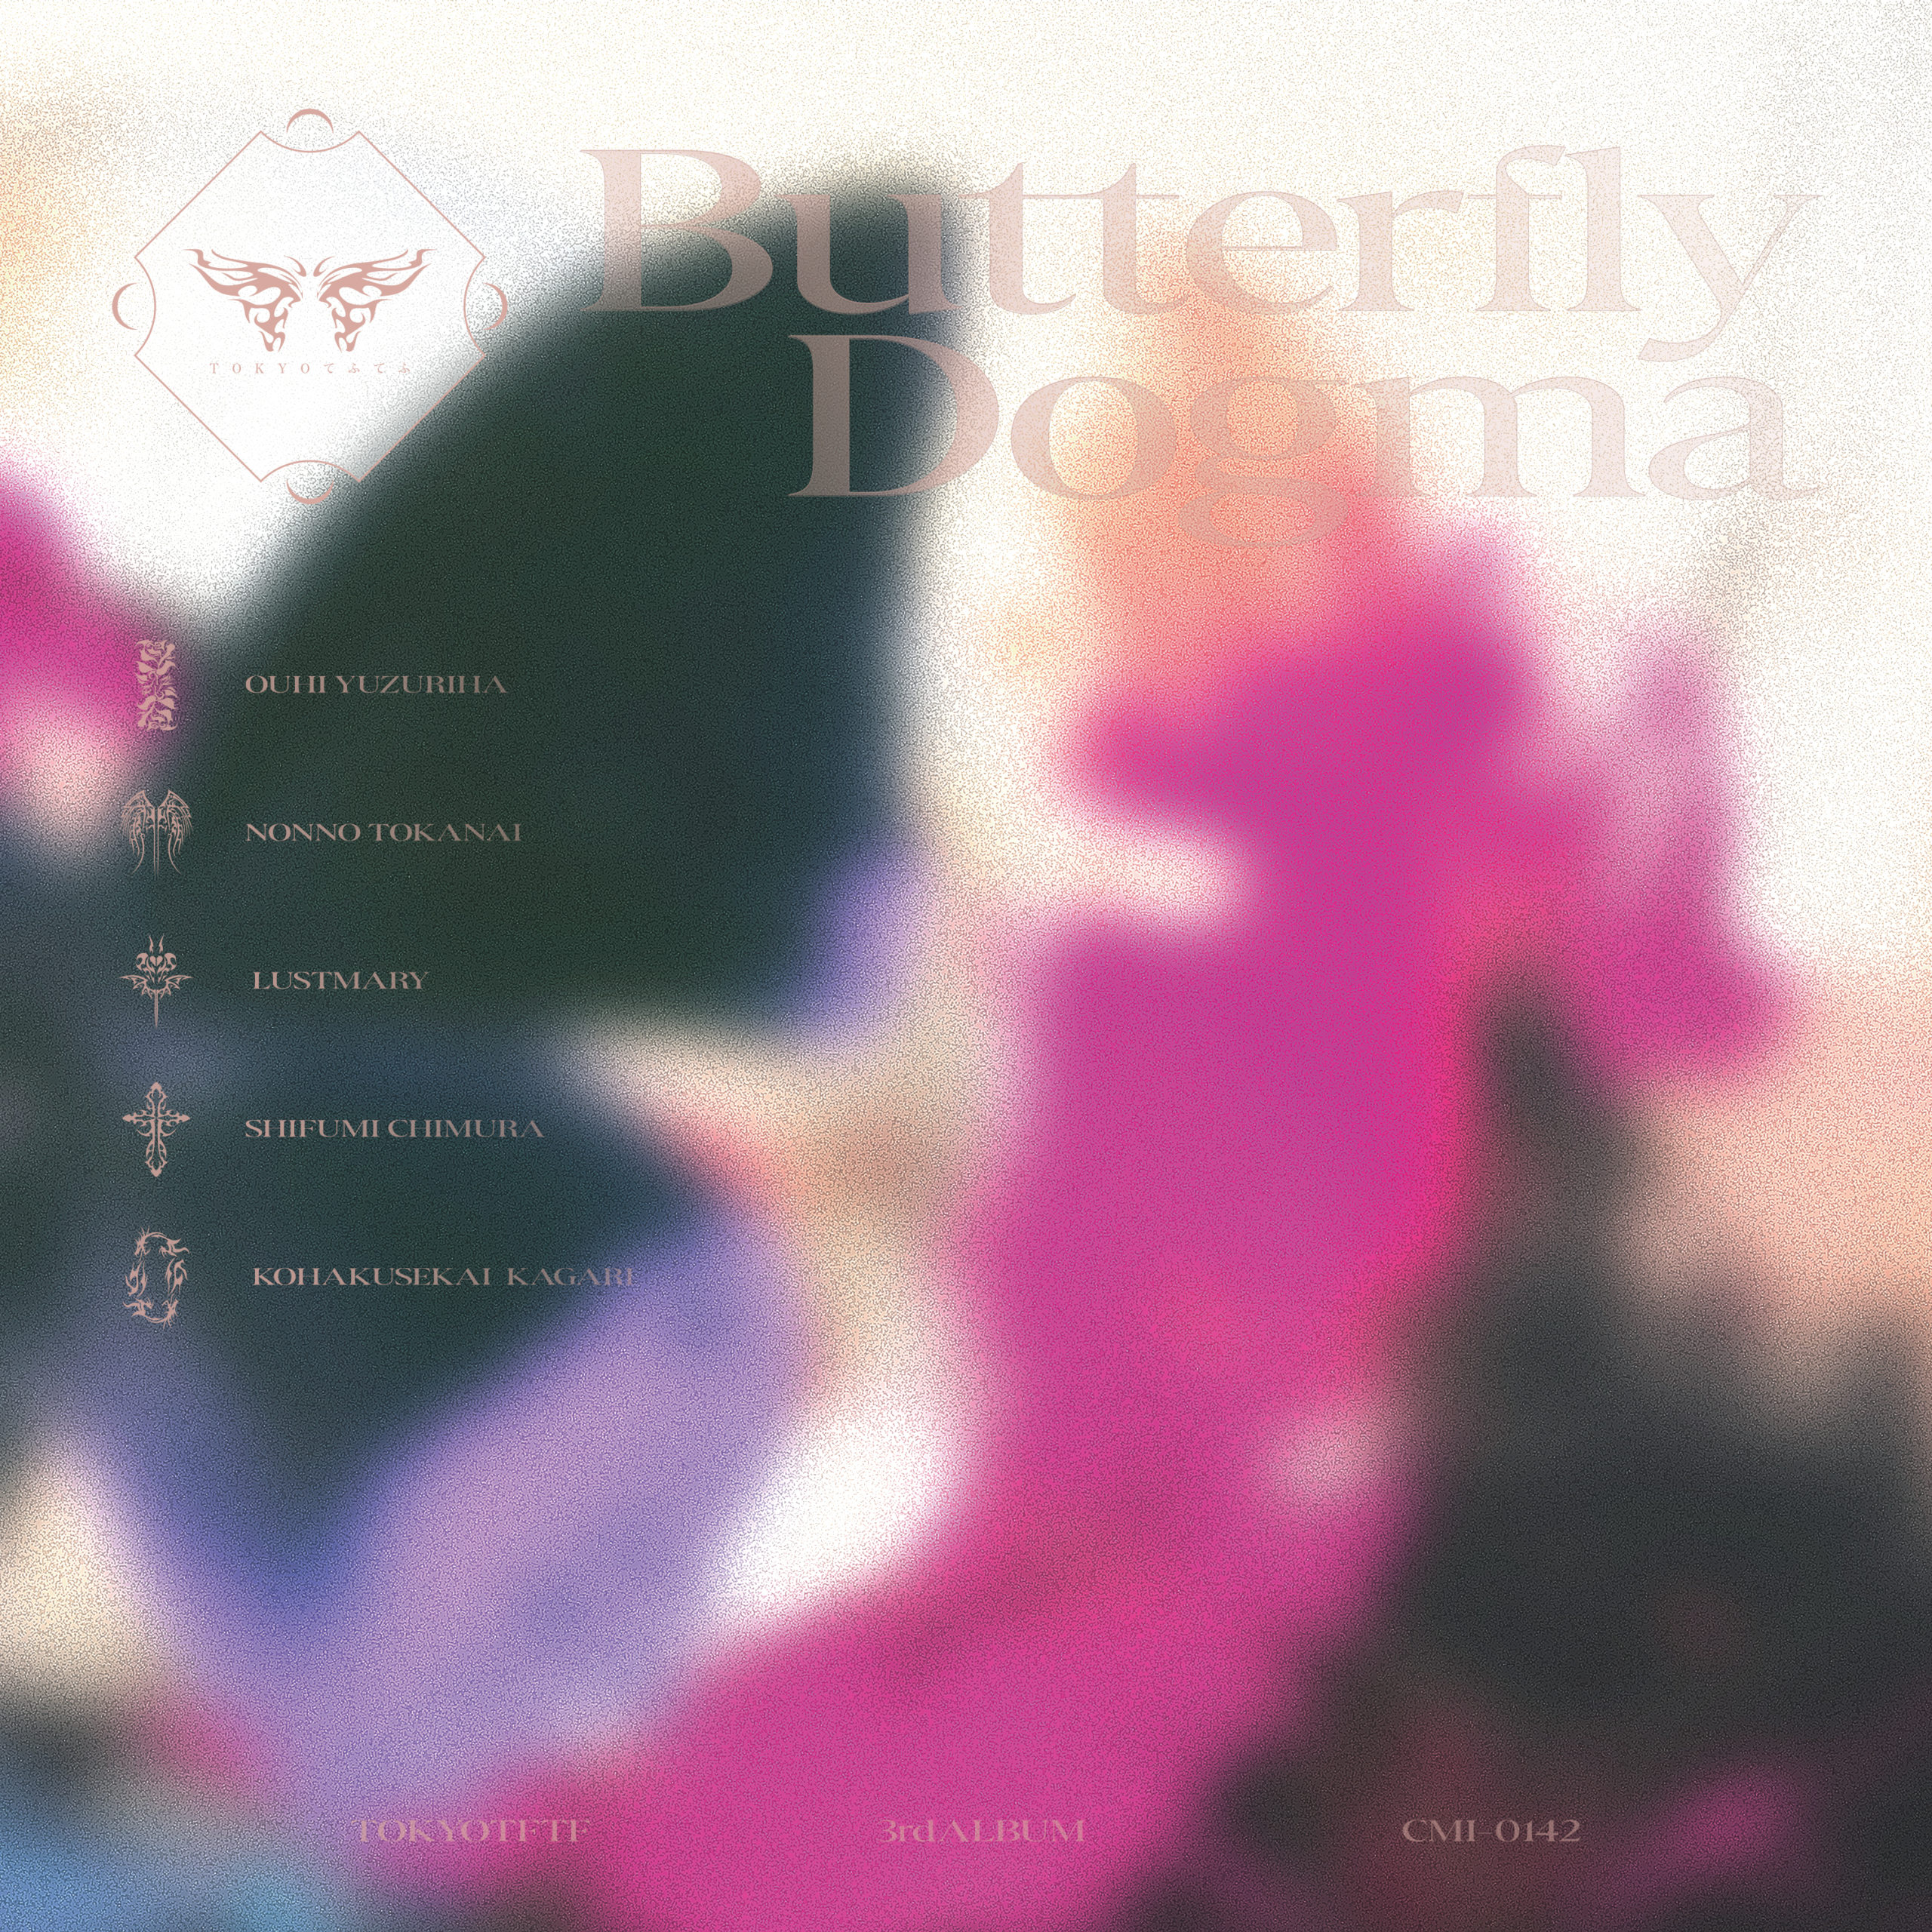 Butterfly Dogma